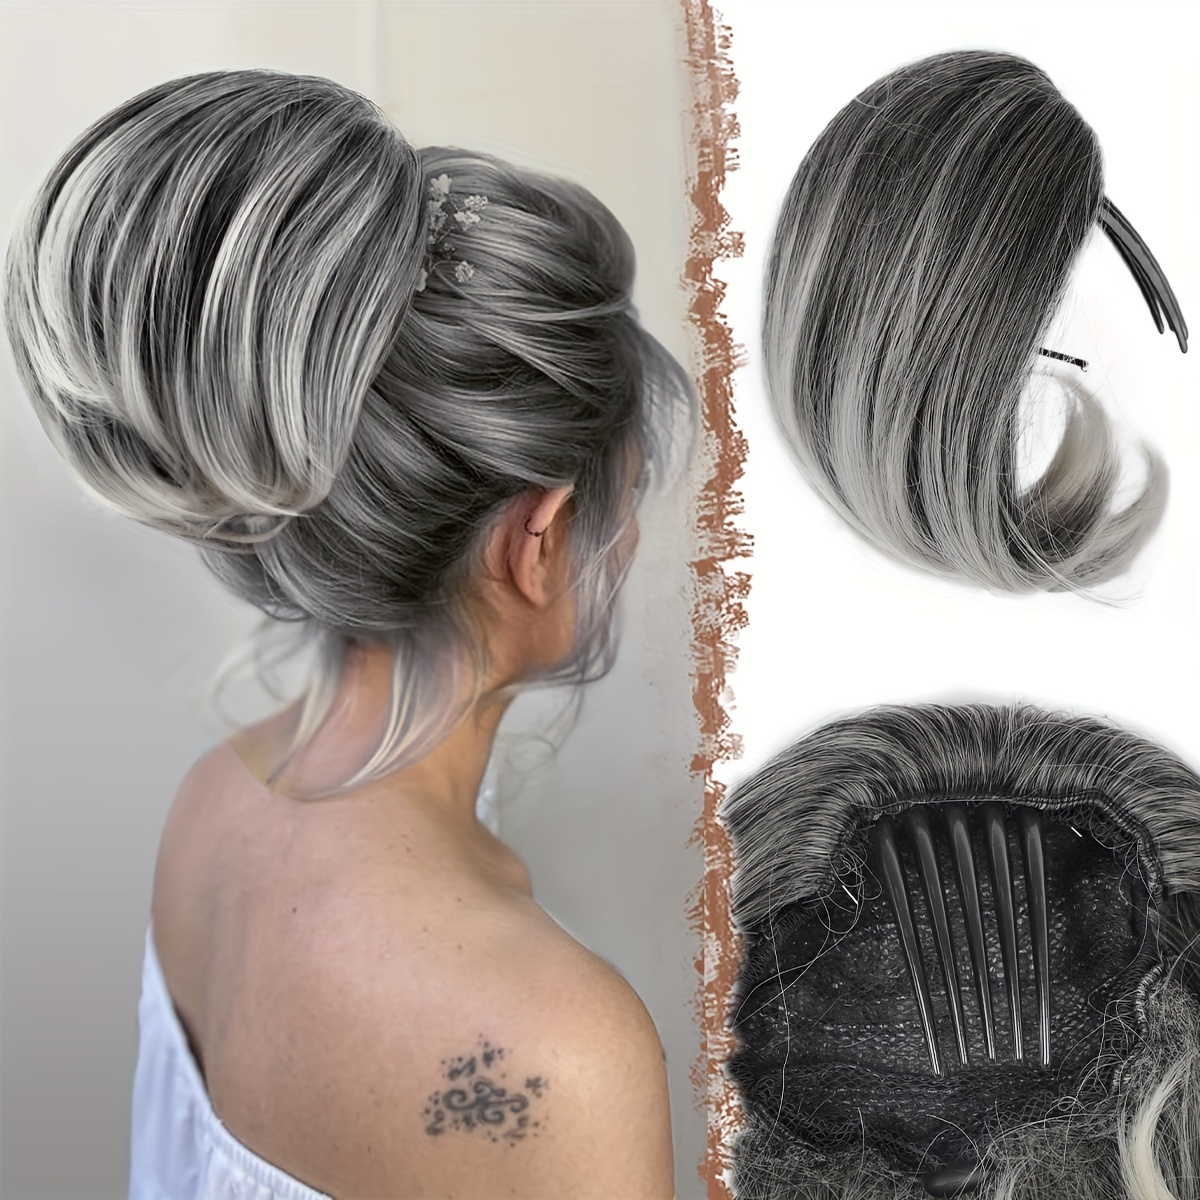 

1pc Synthetic Hair Bun Hairpiece Fully Short Ponytail Bun Mixed Blonde Hair Chignon With Comb Bun Updo Drawstring Bun Synthetic Hair Piece Extension For Women, Mixed Blonde And Ash Blonde